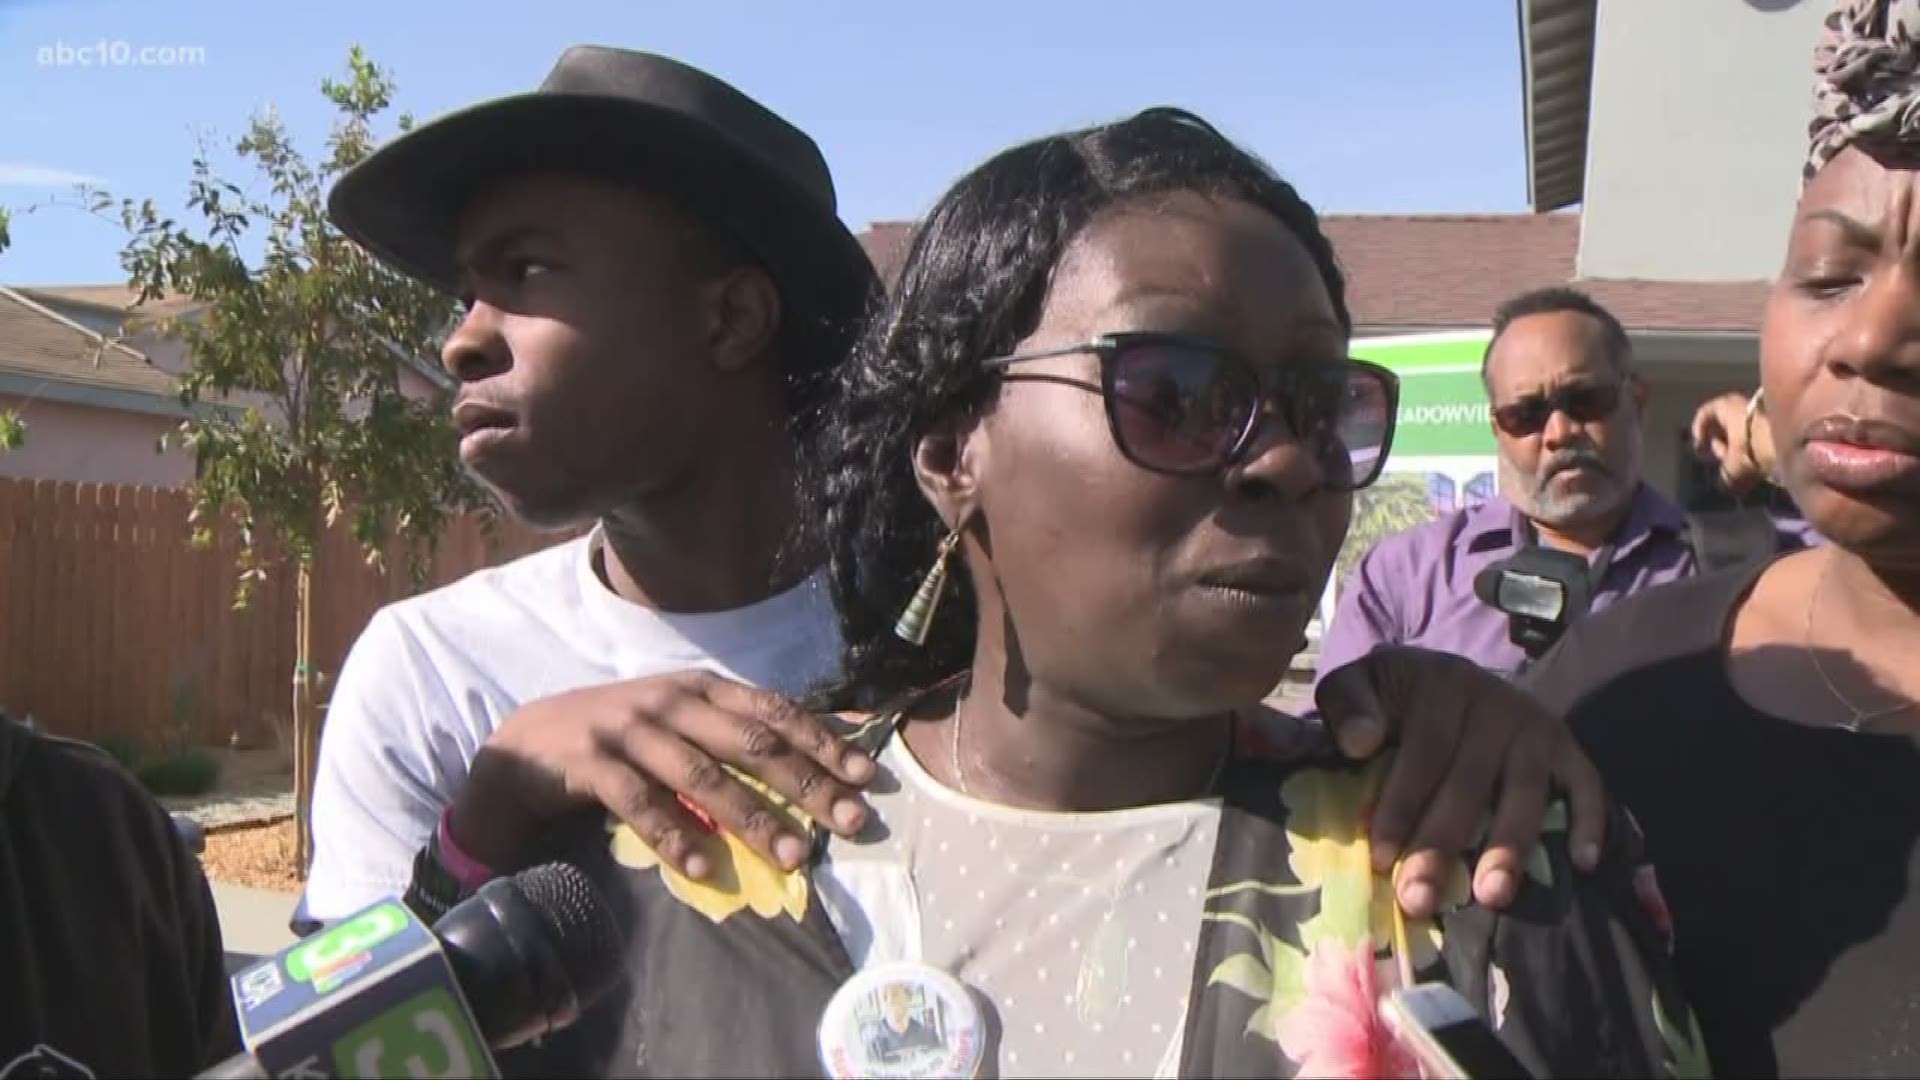 Stephon Clark's family held a ceremony Wednesday to thank members of the community for their support following the death of their son, brother, and grandson.